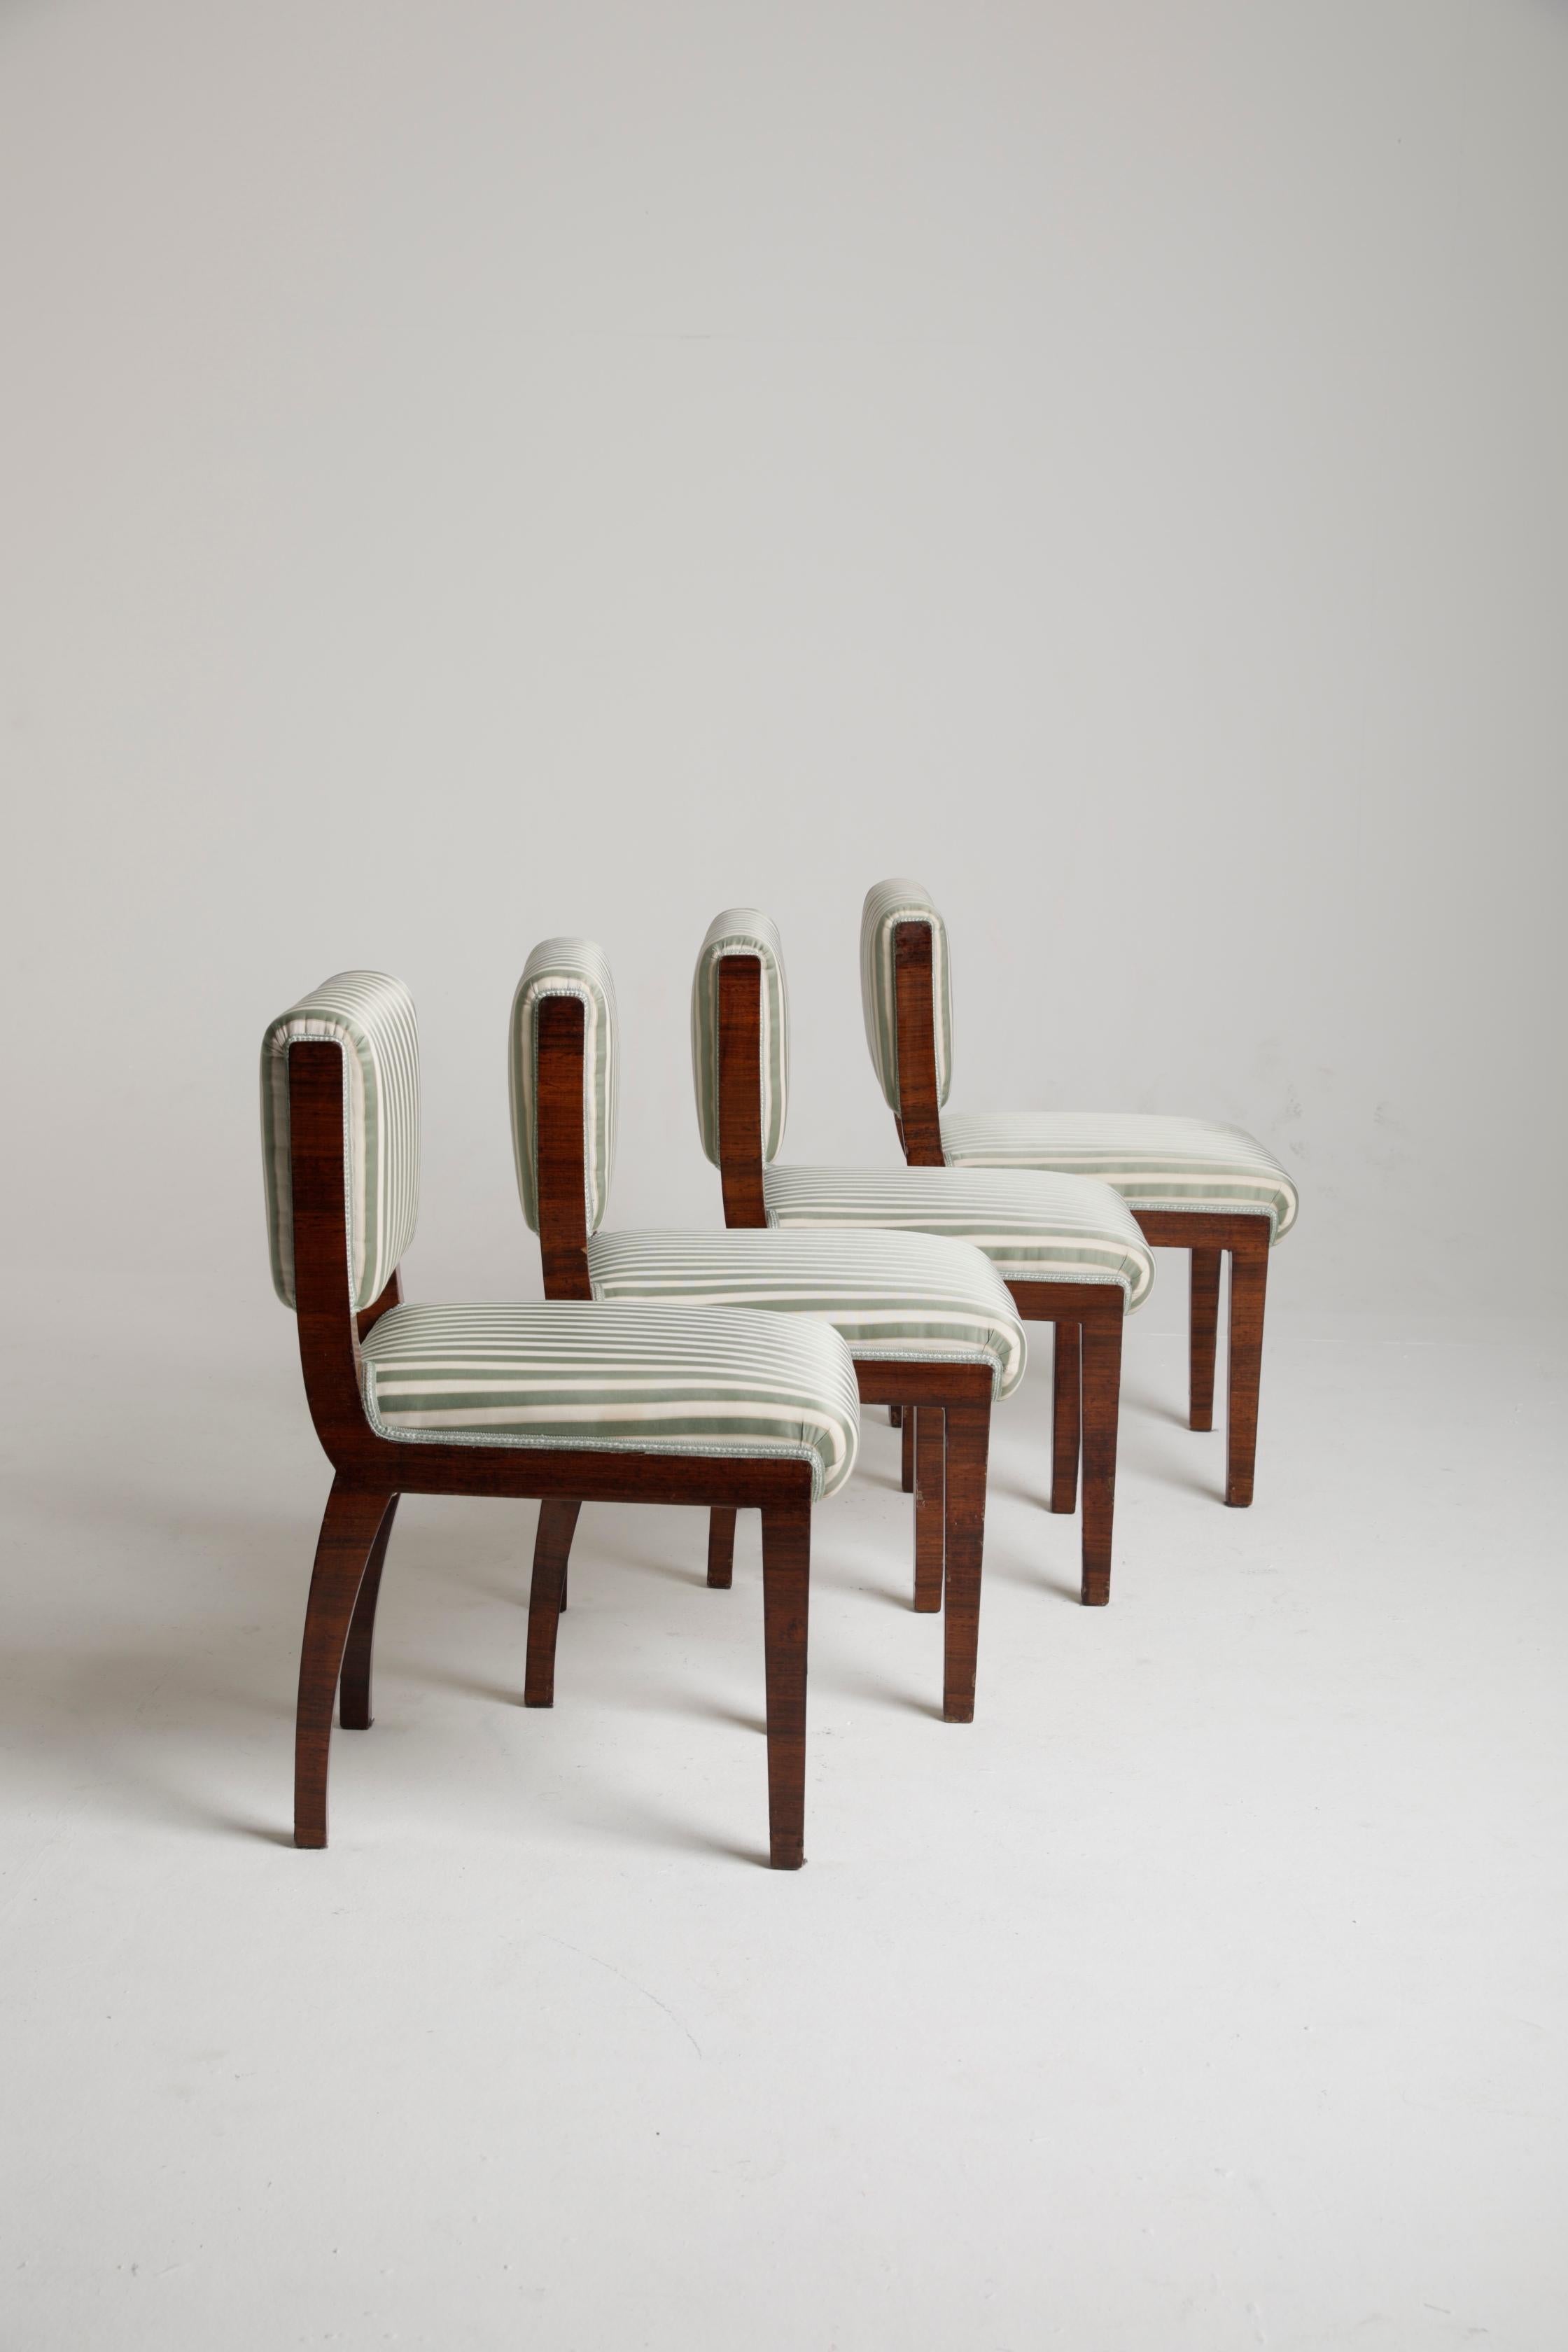 Set of 4 art Déco chairs in wood and fabric from an important Italian villa, attributable to the famous Italian architect and designer Melchiorre Bega. it is a truly refined set, capable of adapting well to an elegant and precious context